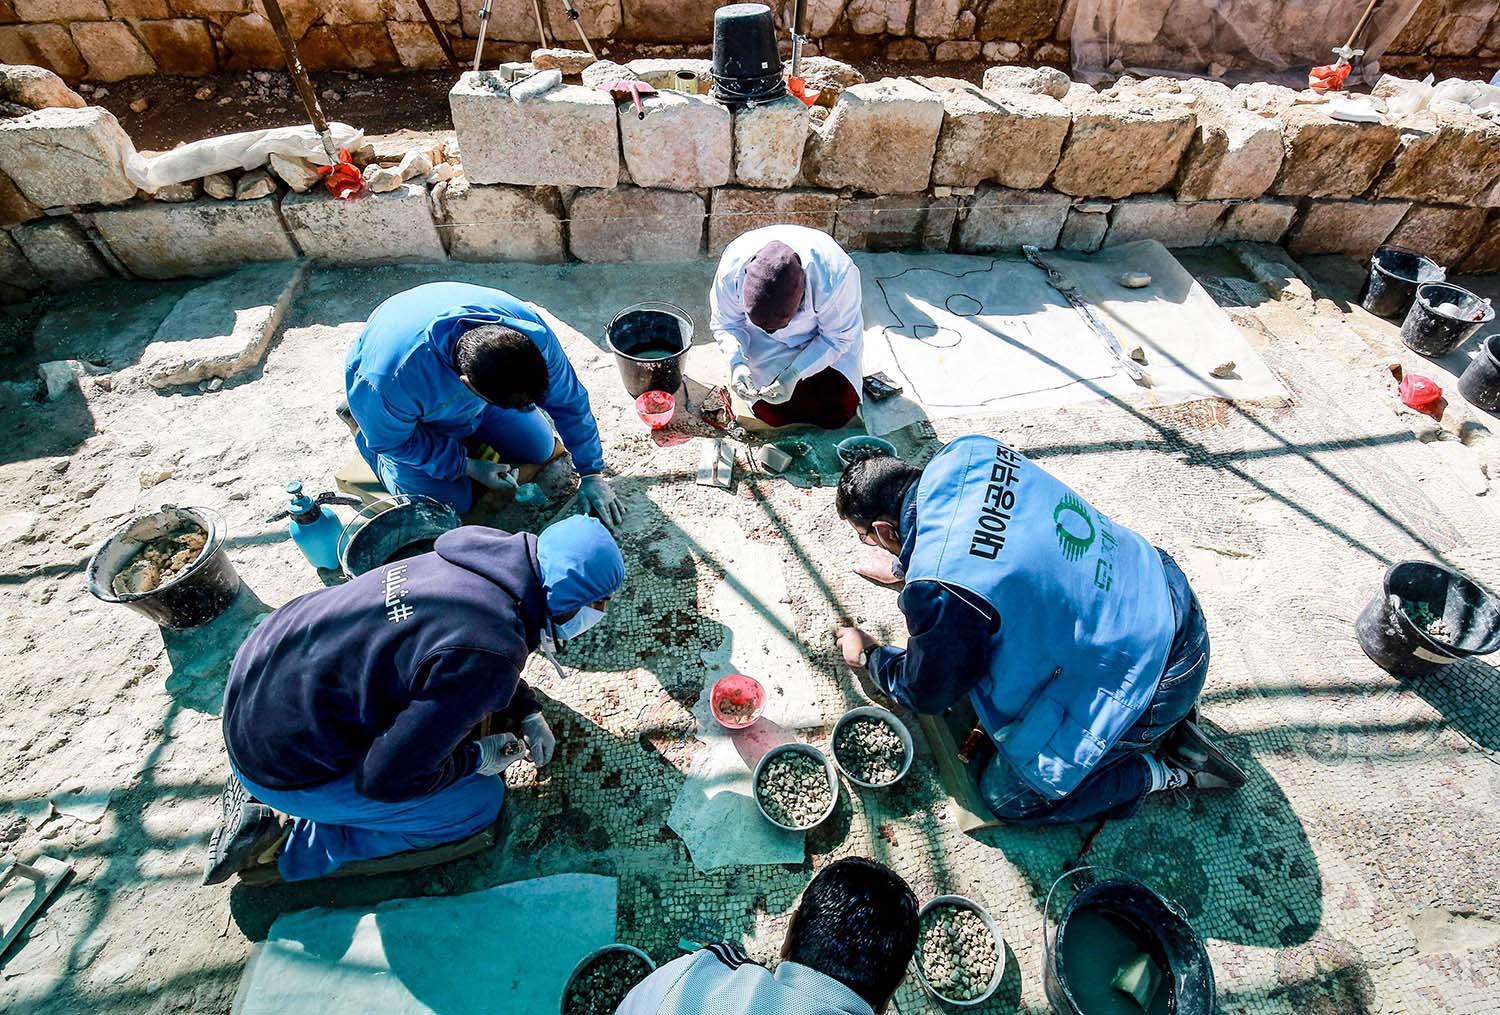 Local people and Syrian refugees work side-by-side to restore the ruins